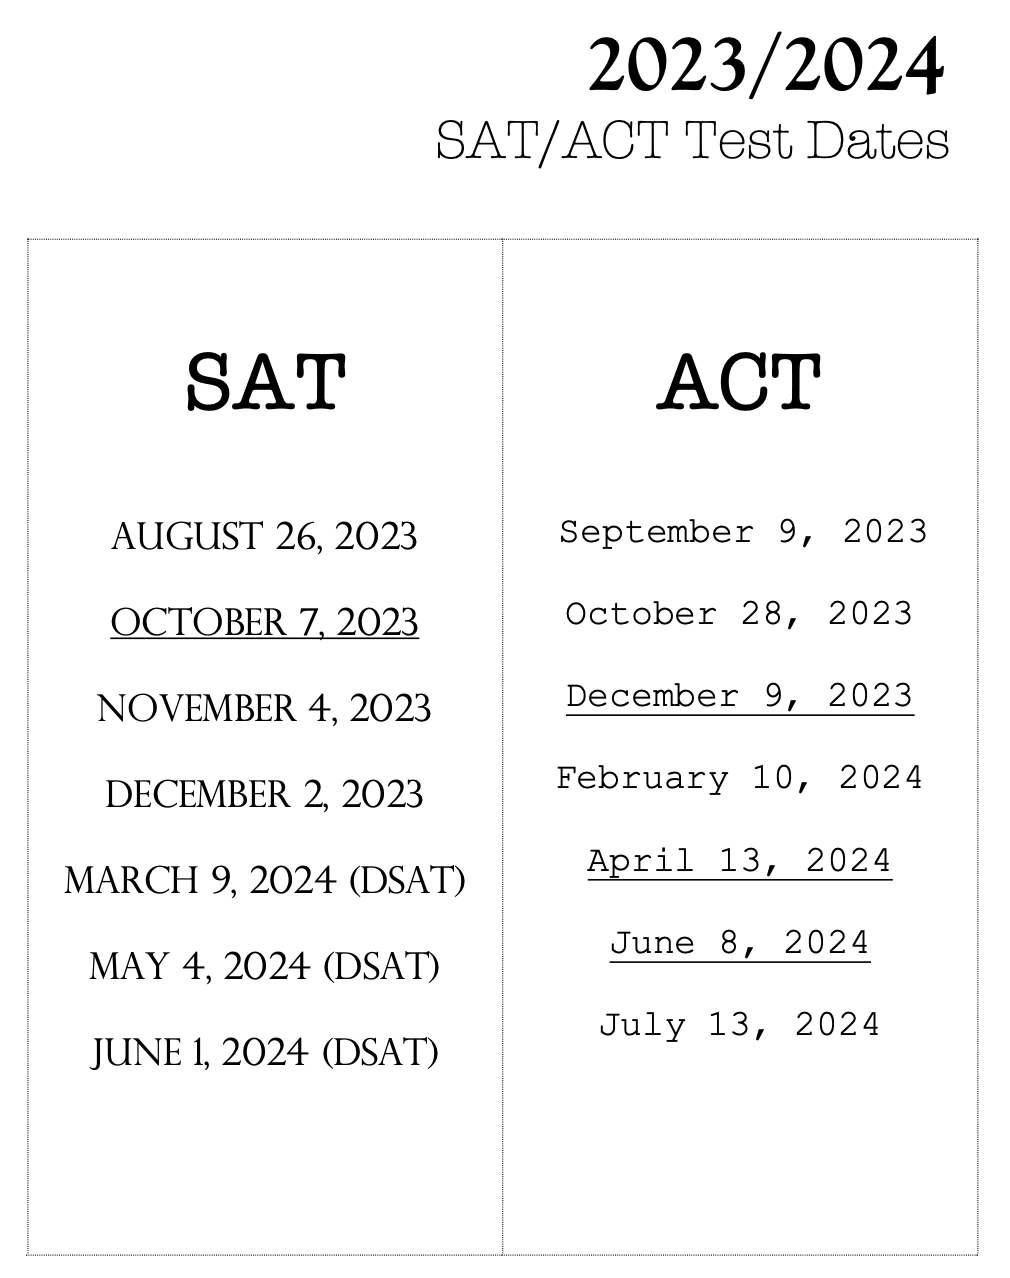 SAT and ACT test dates, 20232024 Academic Year